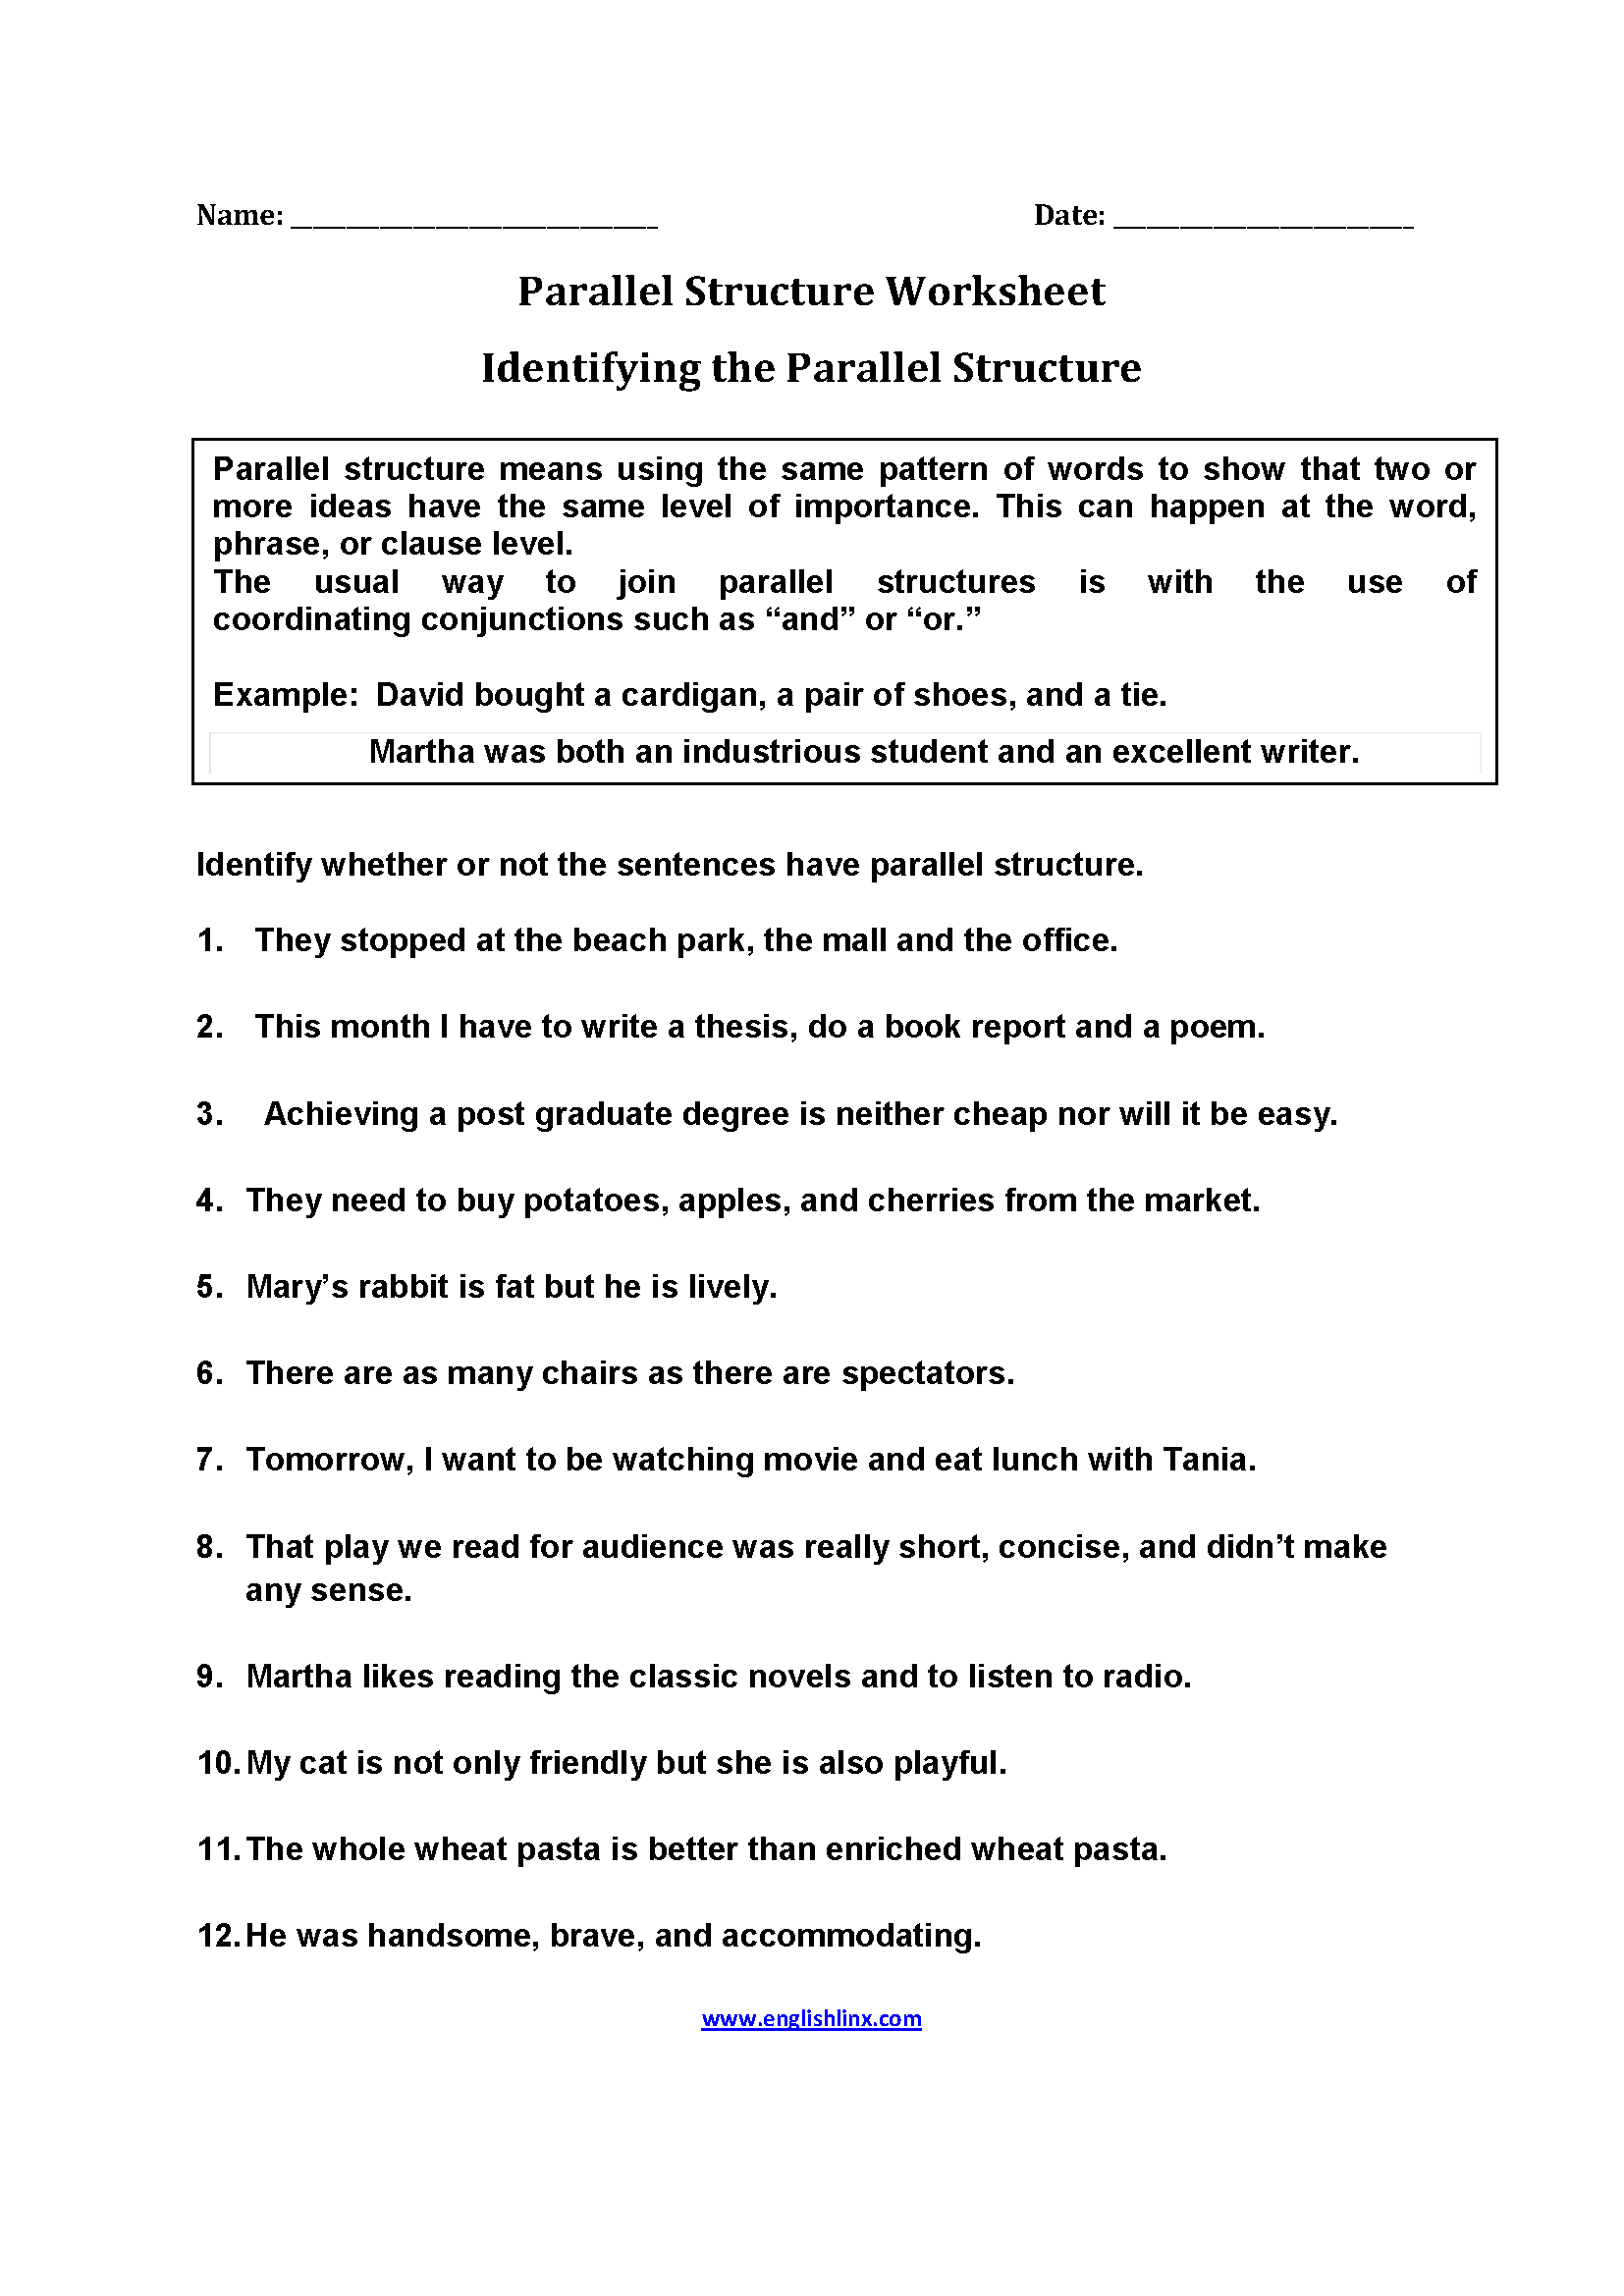 Parallel Structure Worksheet Answers